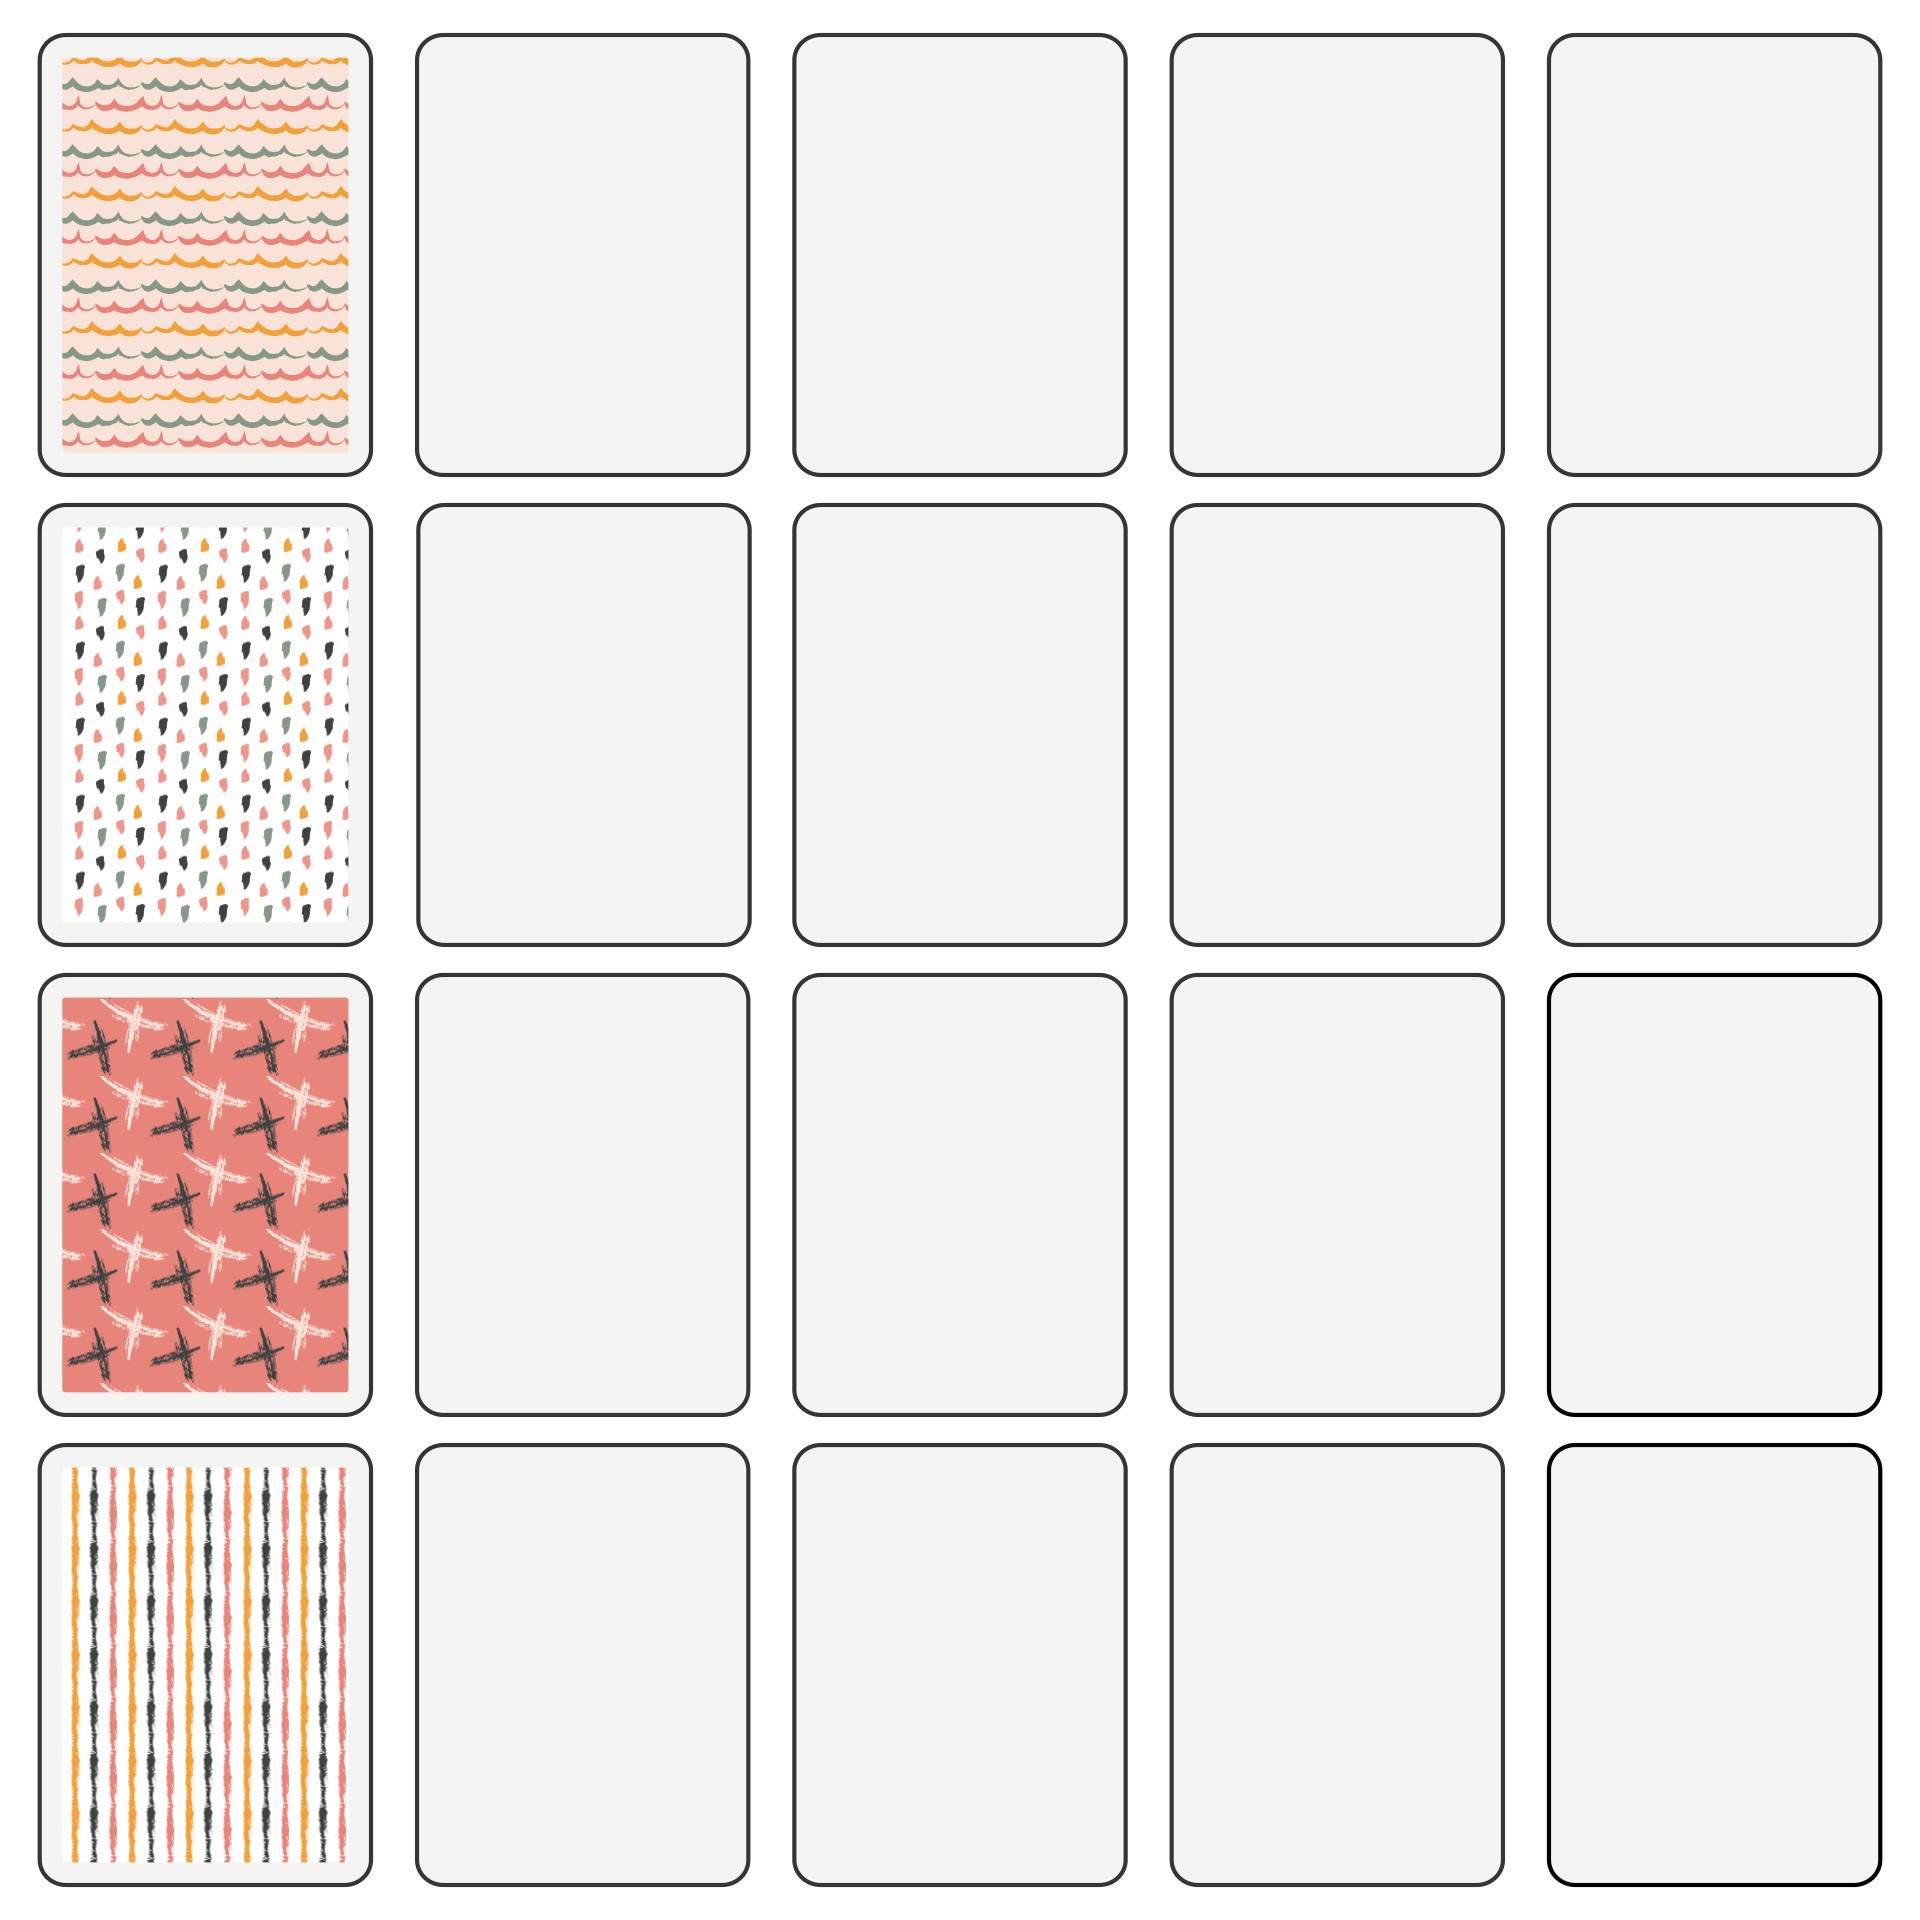 Free Playing Card Template from www.printablee.com